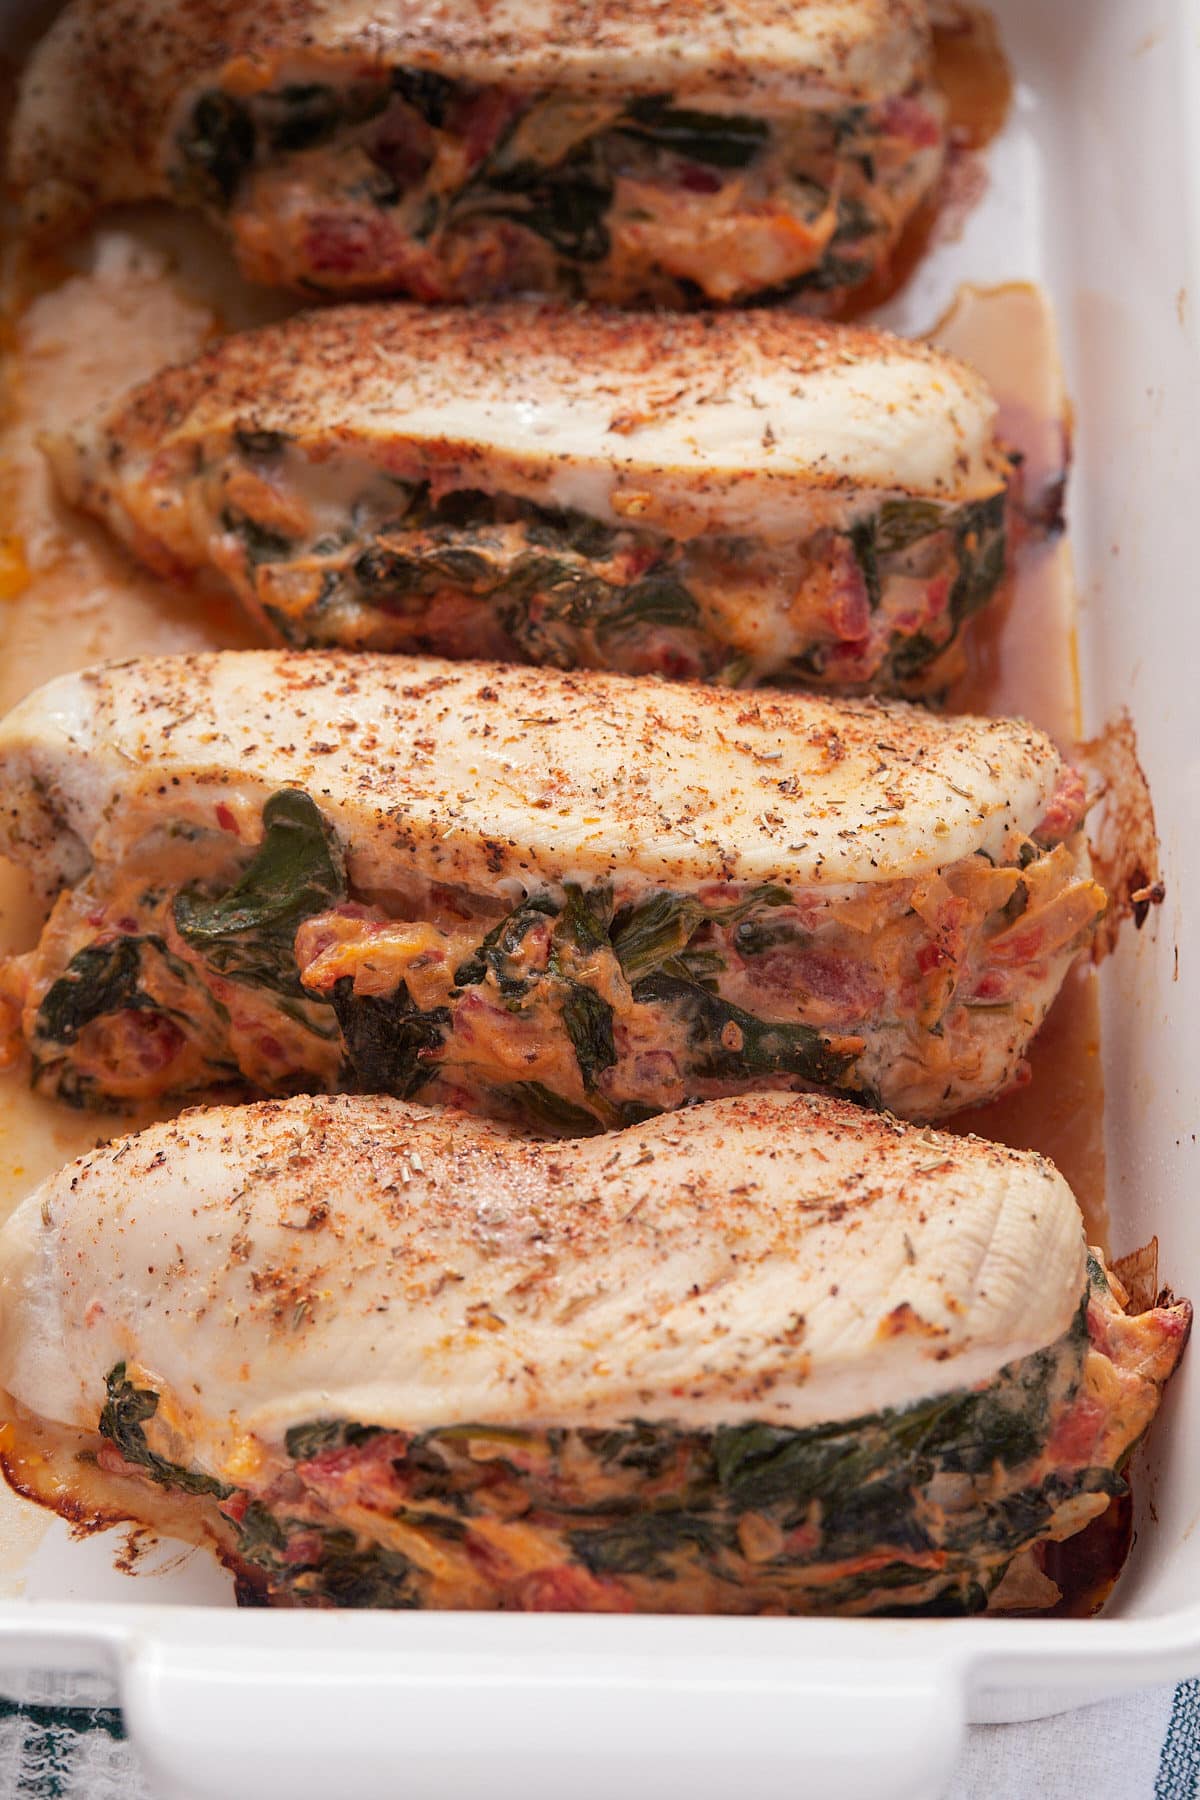 Four baked chicken breasts stuffed with spinach in a baking dish.